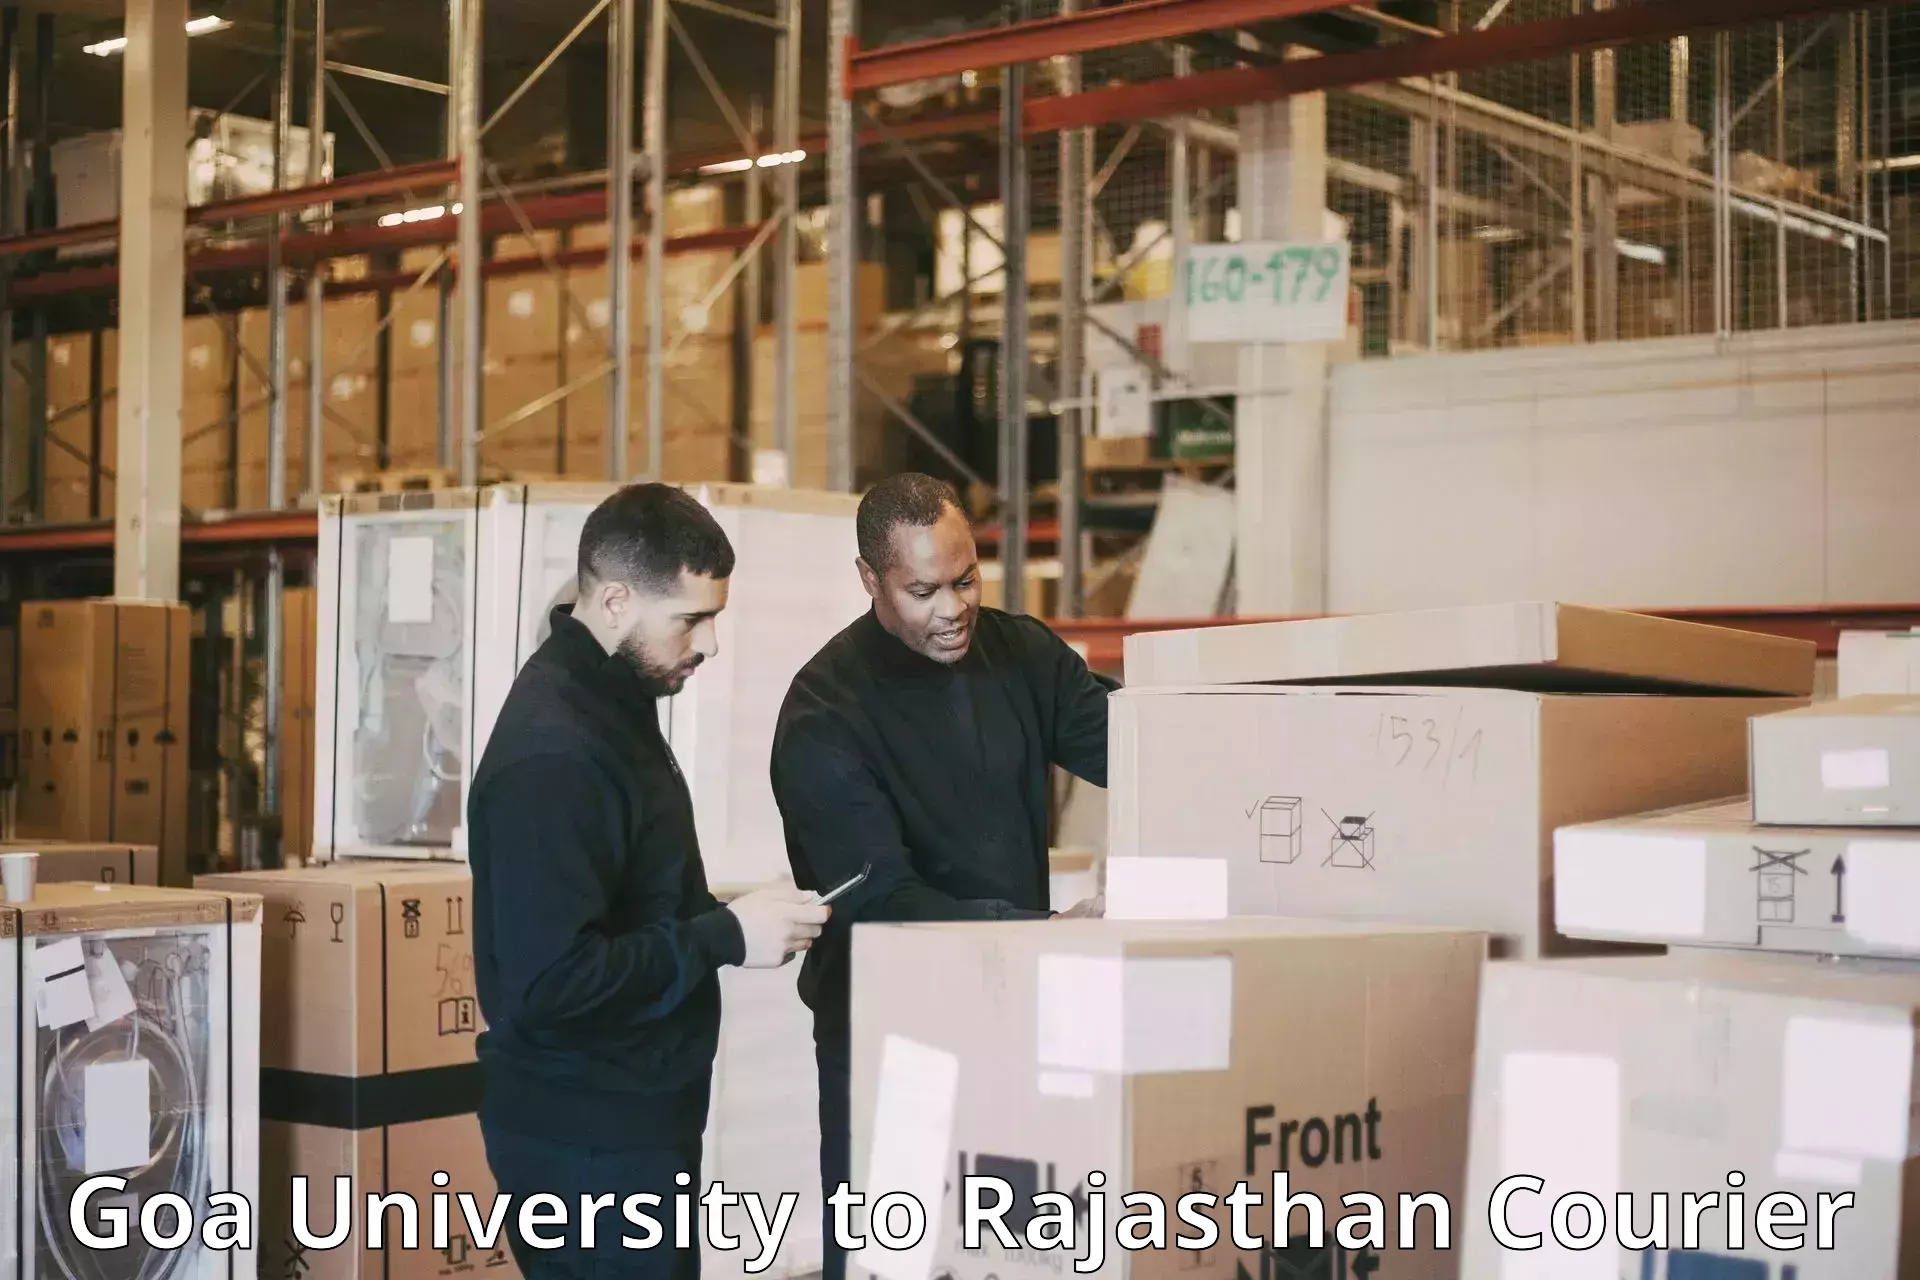 Global shipping networks in Goa University to Birla Institute of Technology and Science Pilani